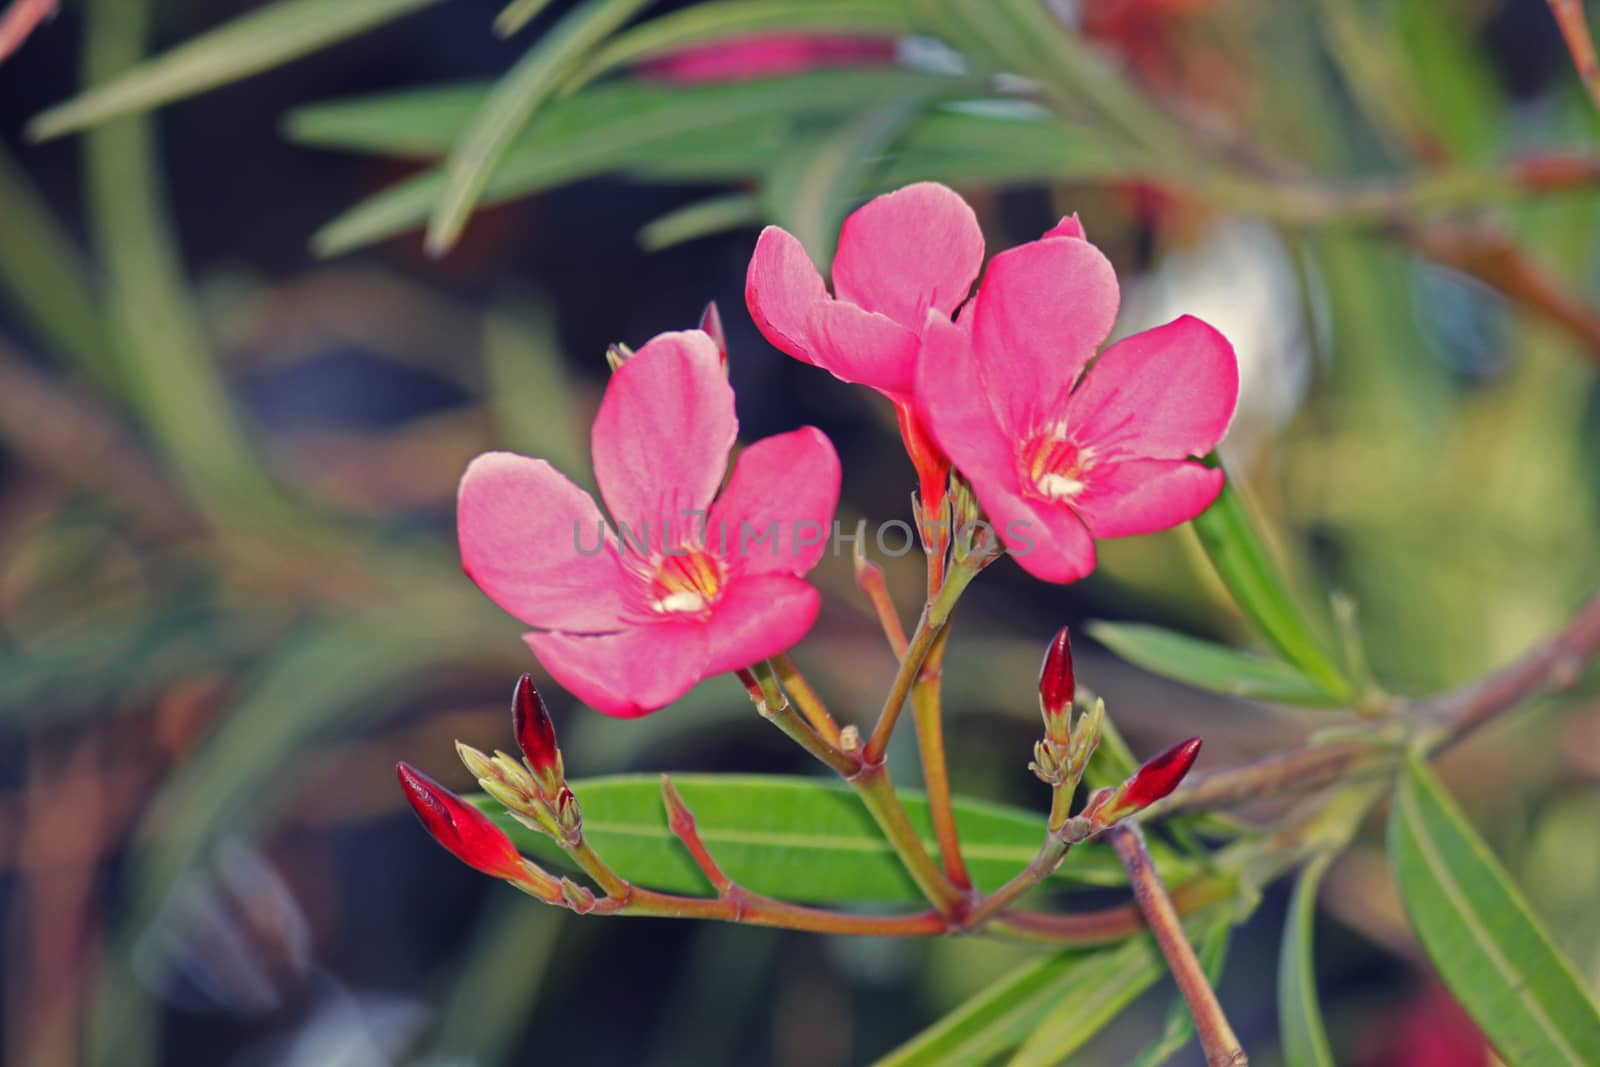 Nerium oleander is an evergreen shrub or small tree in the dogbane family Apocynaceae. It is the only species currently classified in the genus Nerium. Oleander is one of the most poisonous of commonly grown garden plants.